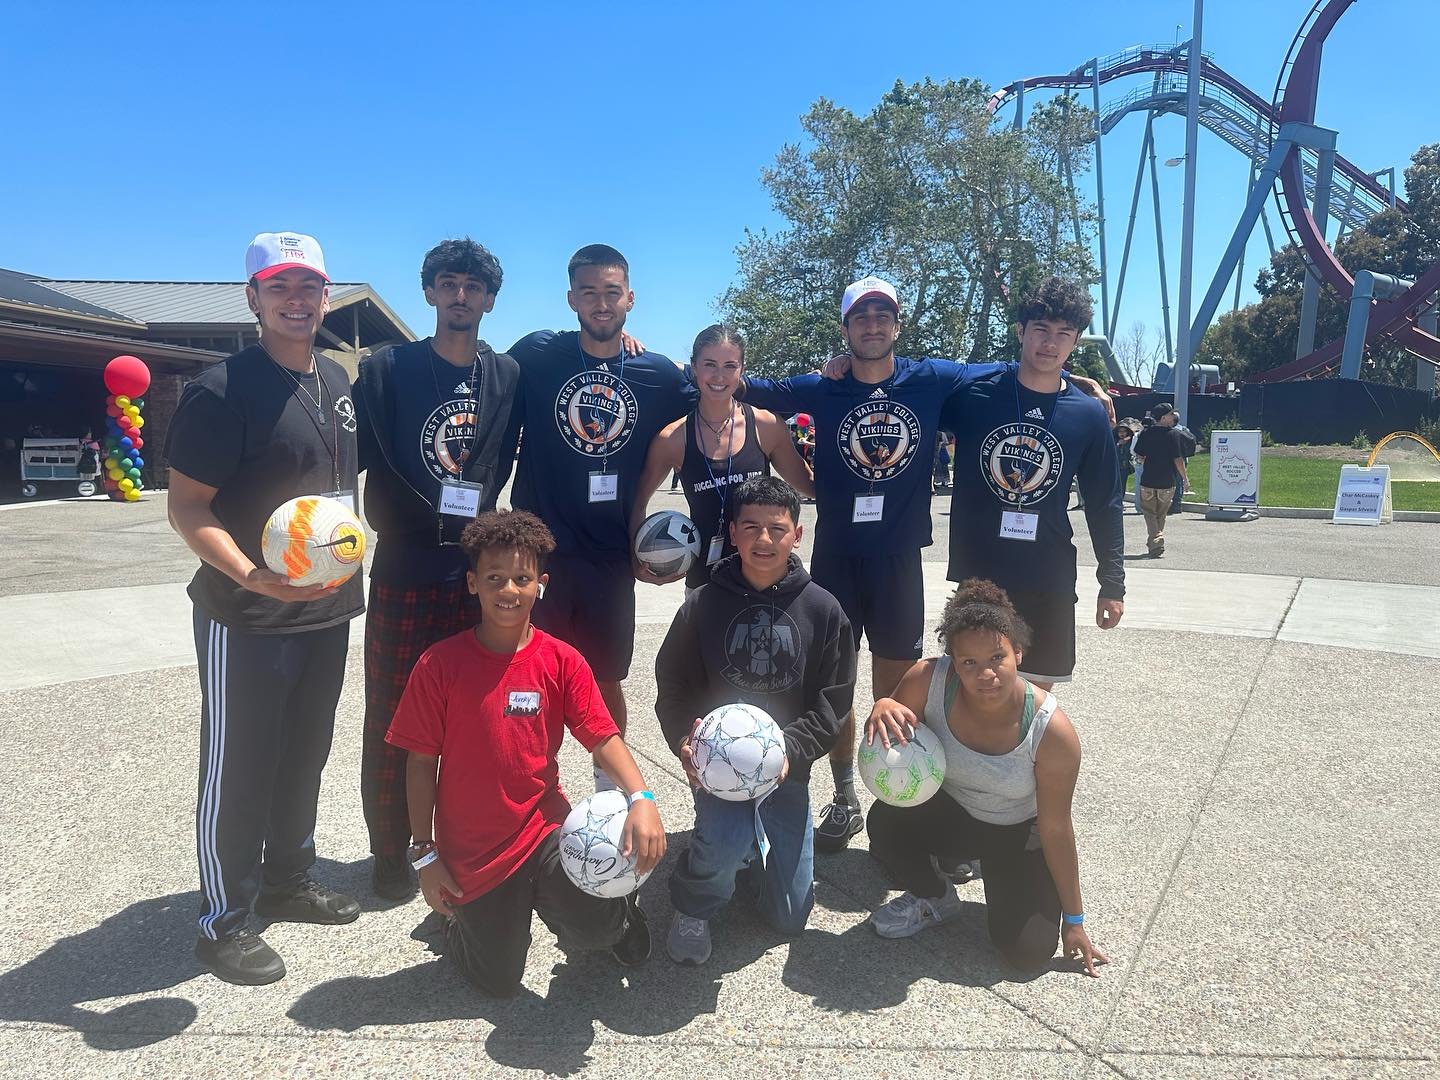 I had such a great time at the 35th Annual @courageouskidsday in partnership with the @americancancersociety at Great America! It was great to see kids with cancer come out with their family and friends for a day of fun and joy. In my experience spea